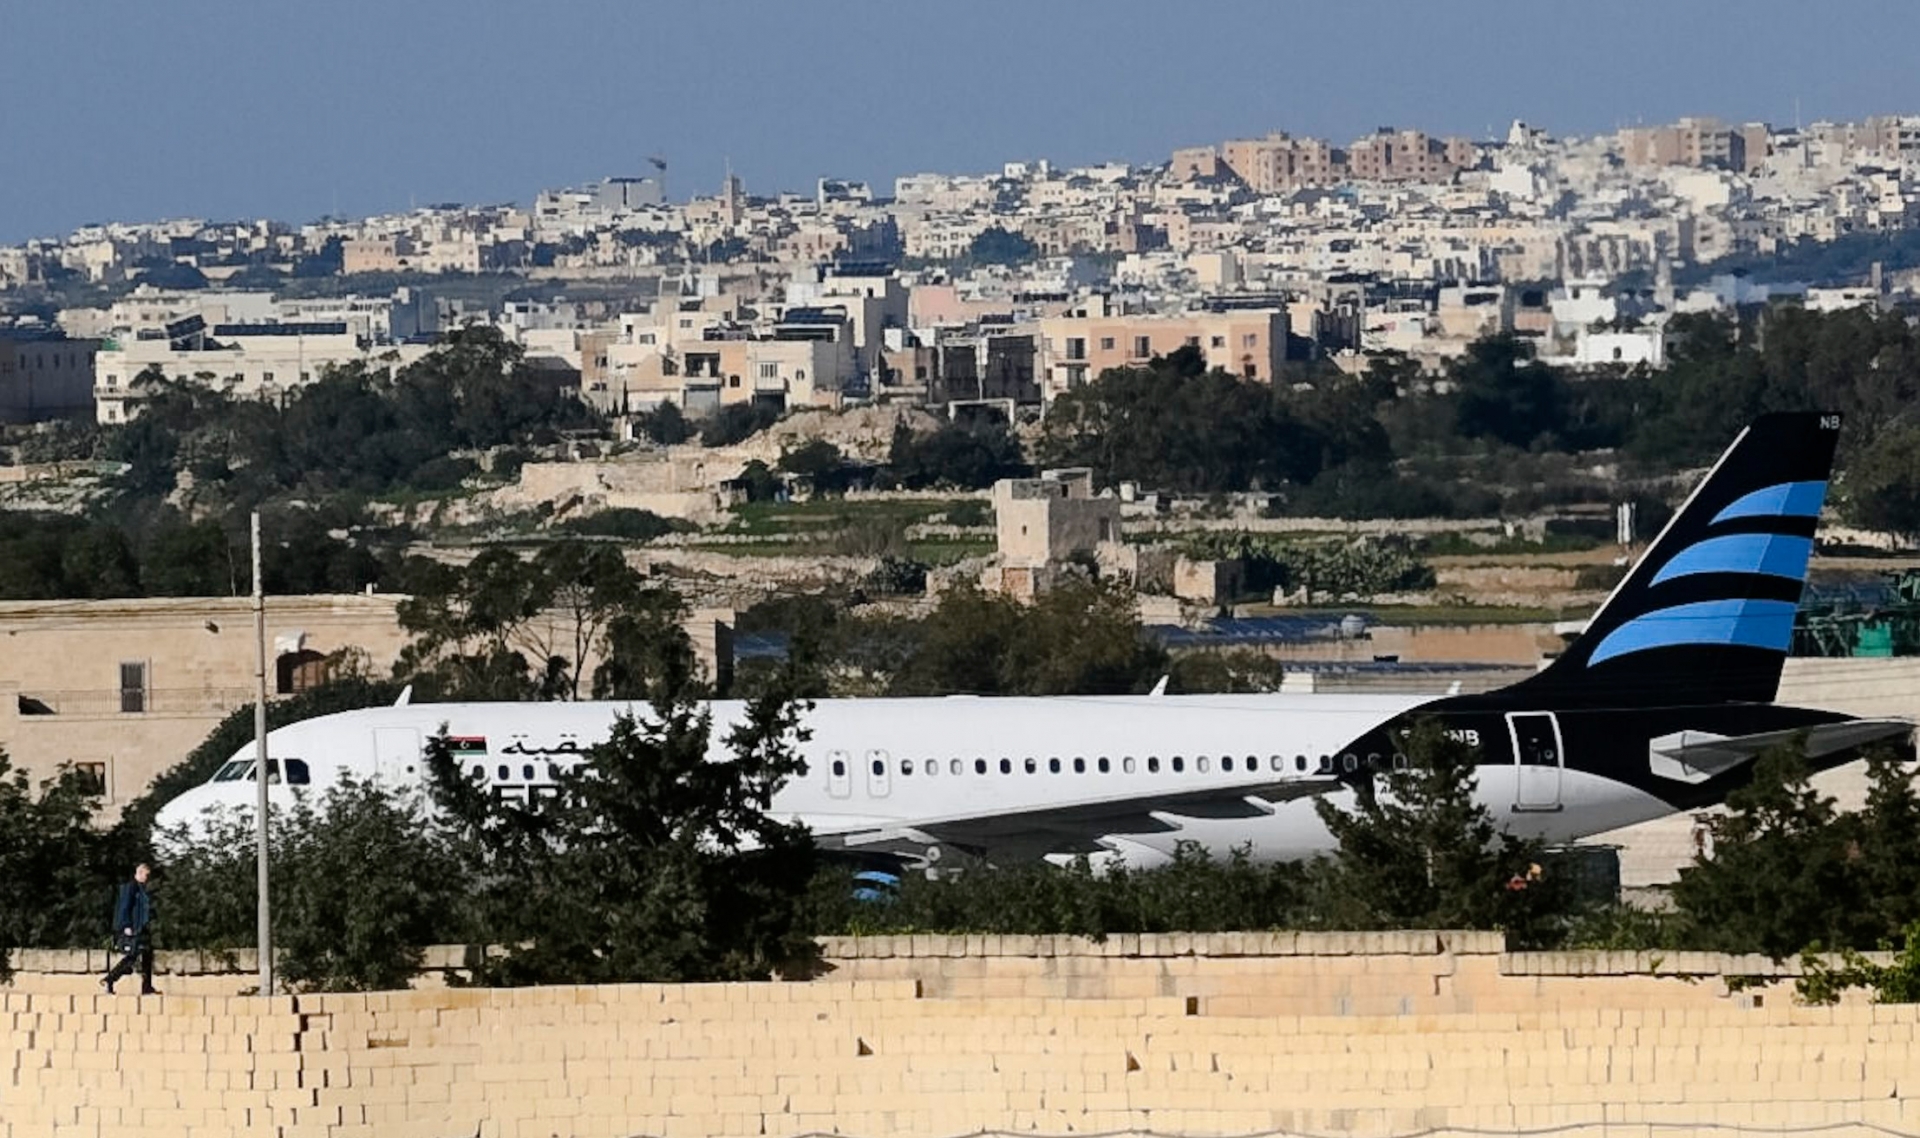 An Afriqiyah Airways plane from Libya stands on the tarmac at Malta's Luqa International airport, Friday, Dec. 23, 2016. Two hijackers diverted a Libyan commercial plane to Malta on Friday and threatened to blow it up with hand grenades, Maltese authorities and state media said.  (AP Photo/Jonathan Borg) Malta Libya Hijacking